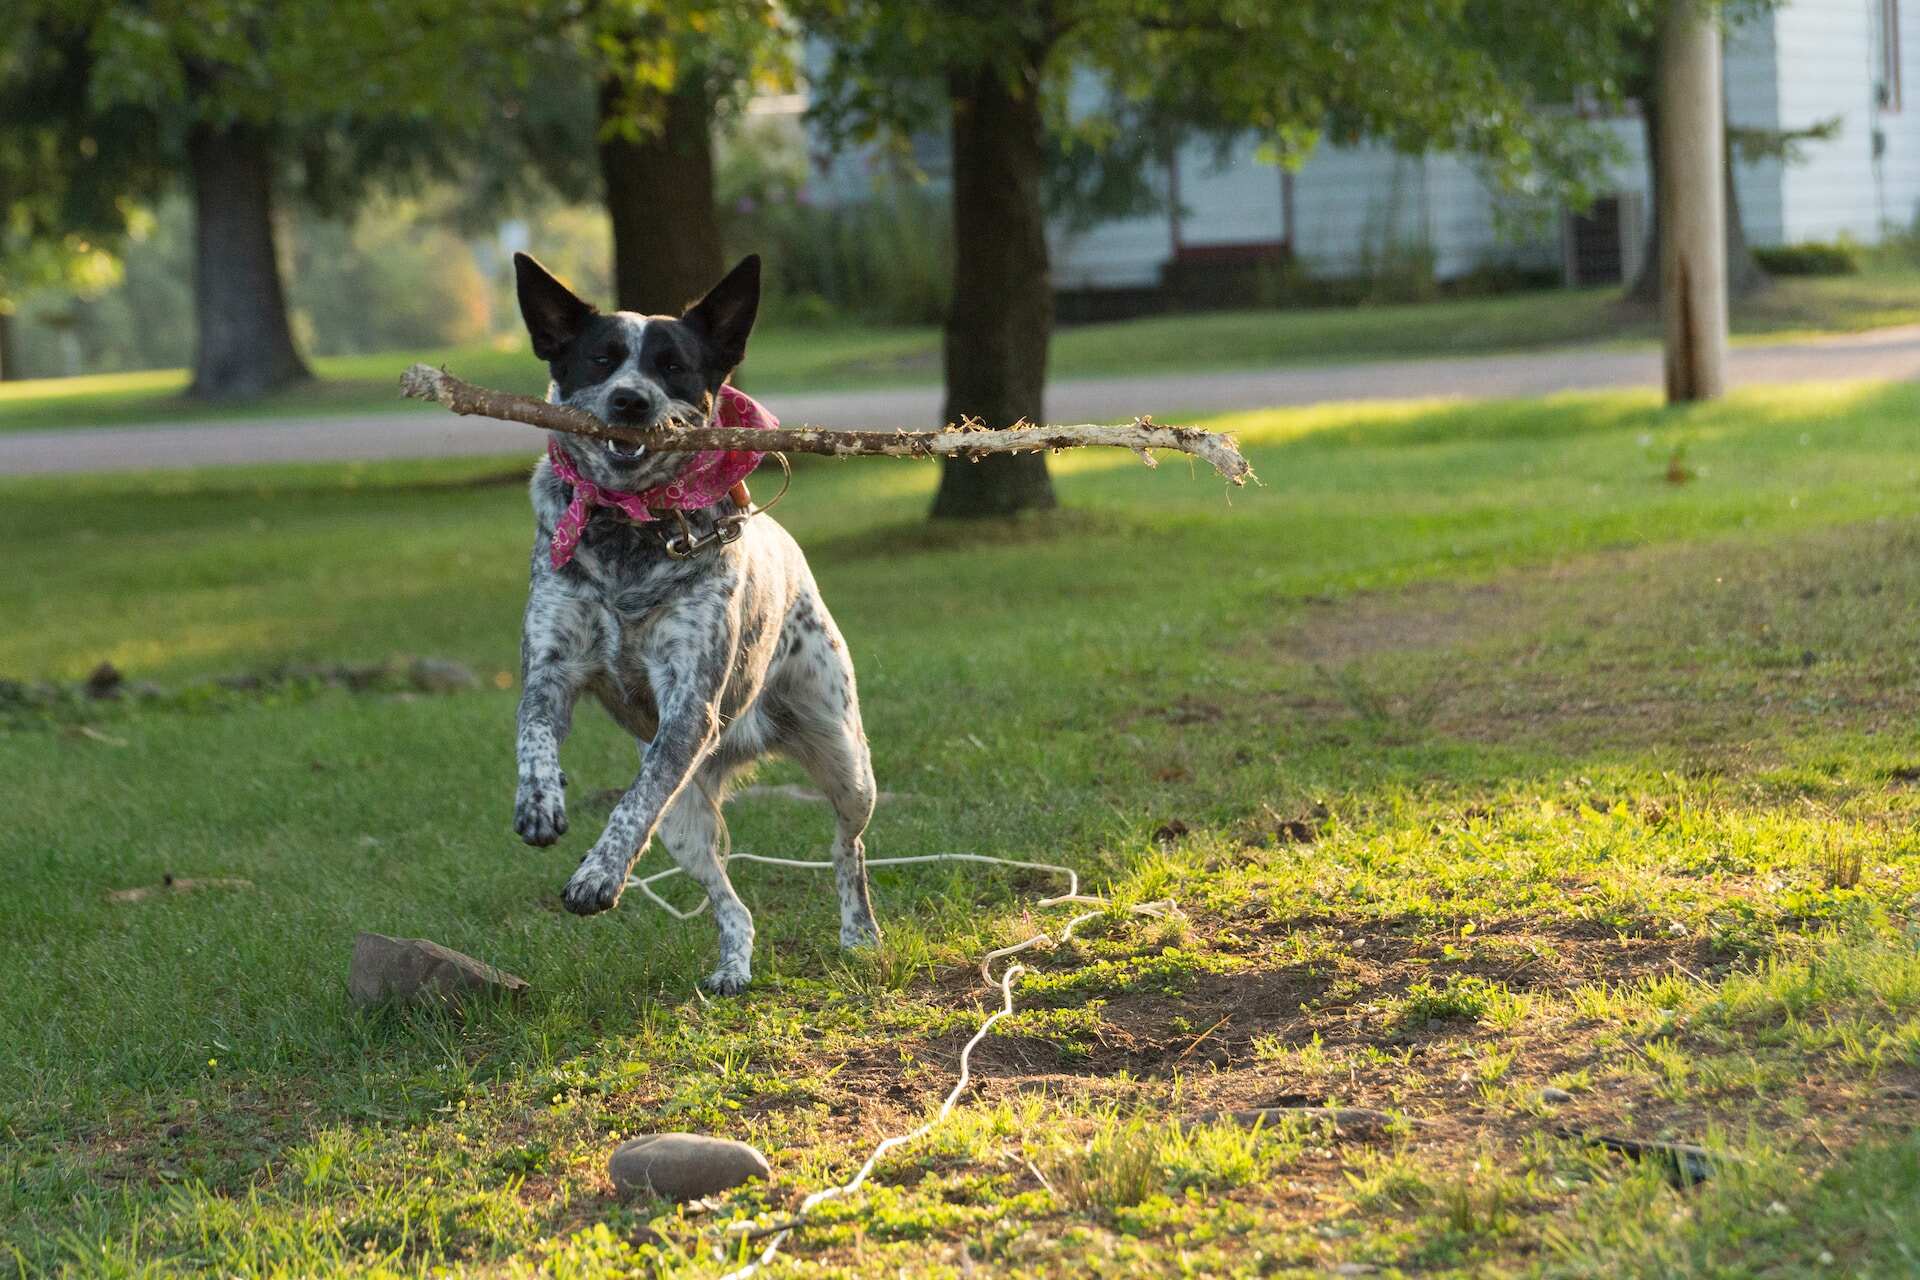 An Australian Cattle dog carrying a stick in their mouth running in a lawn